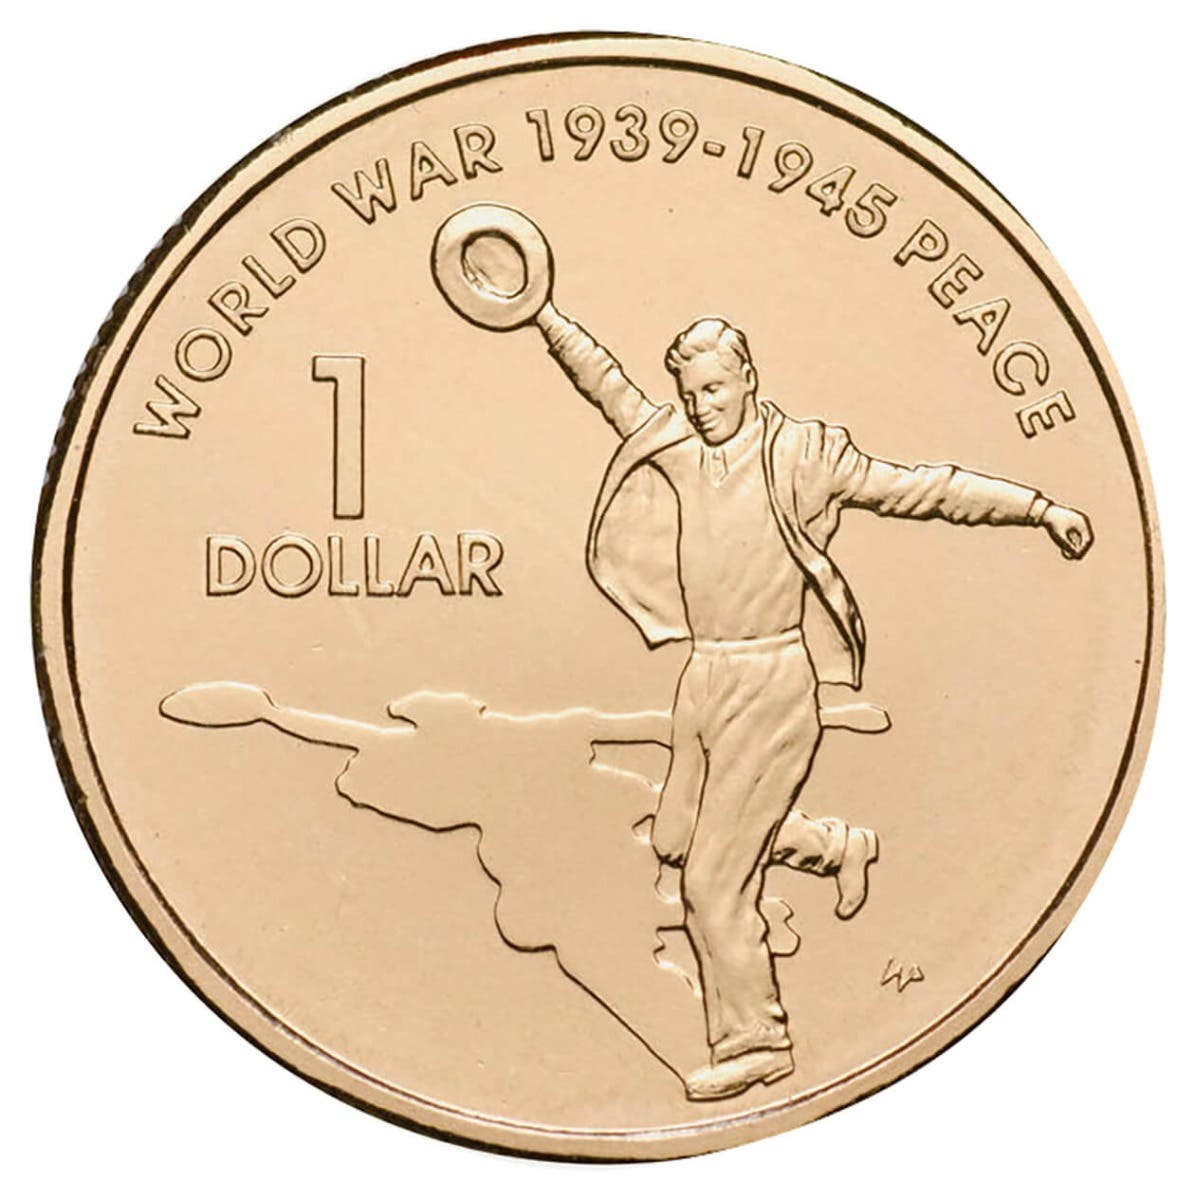 Australia End of WWII 60th Anniversary 2005 $1 Dancing Man Aluminium-Bronze Uncirculated Coin Pack